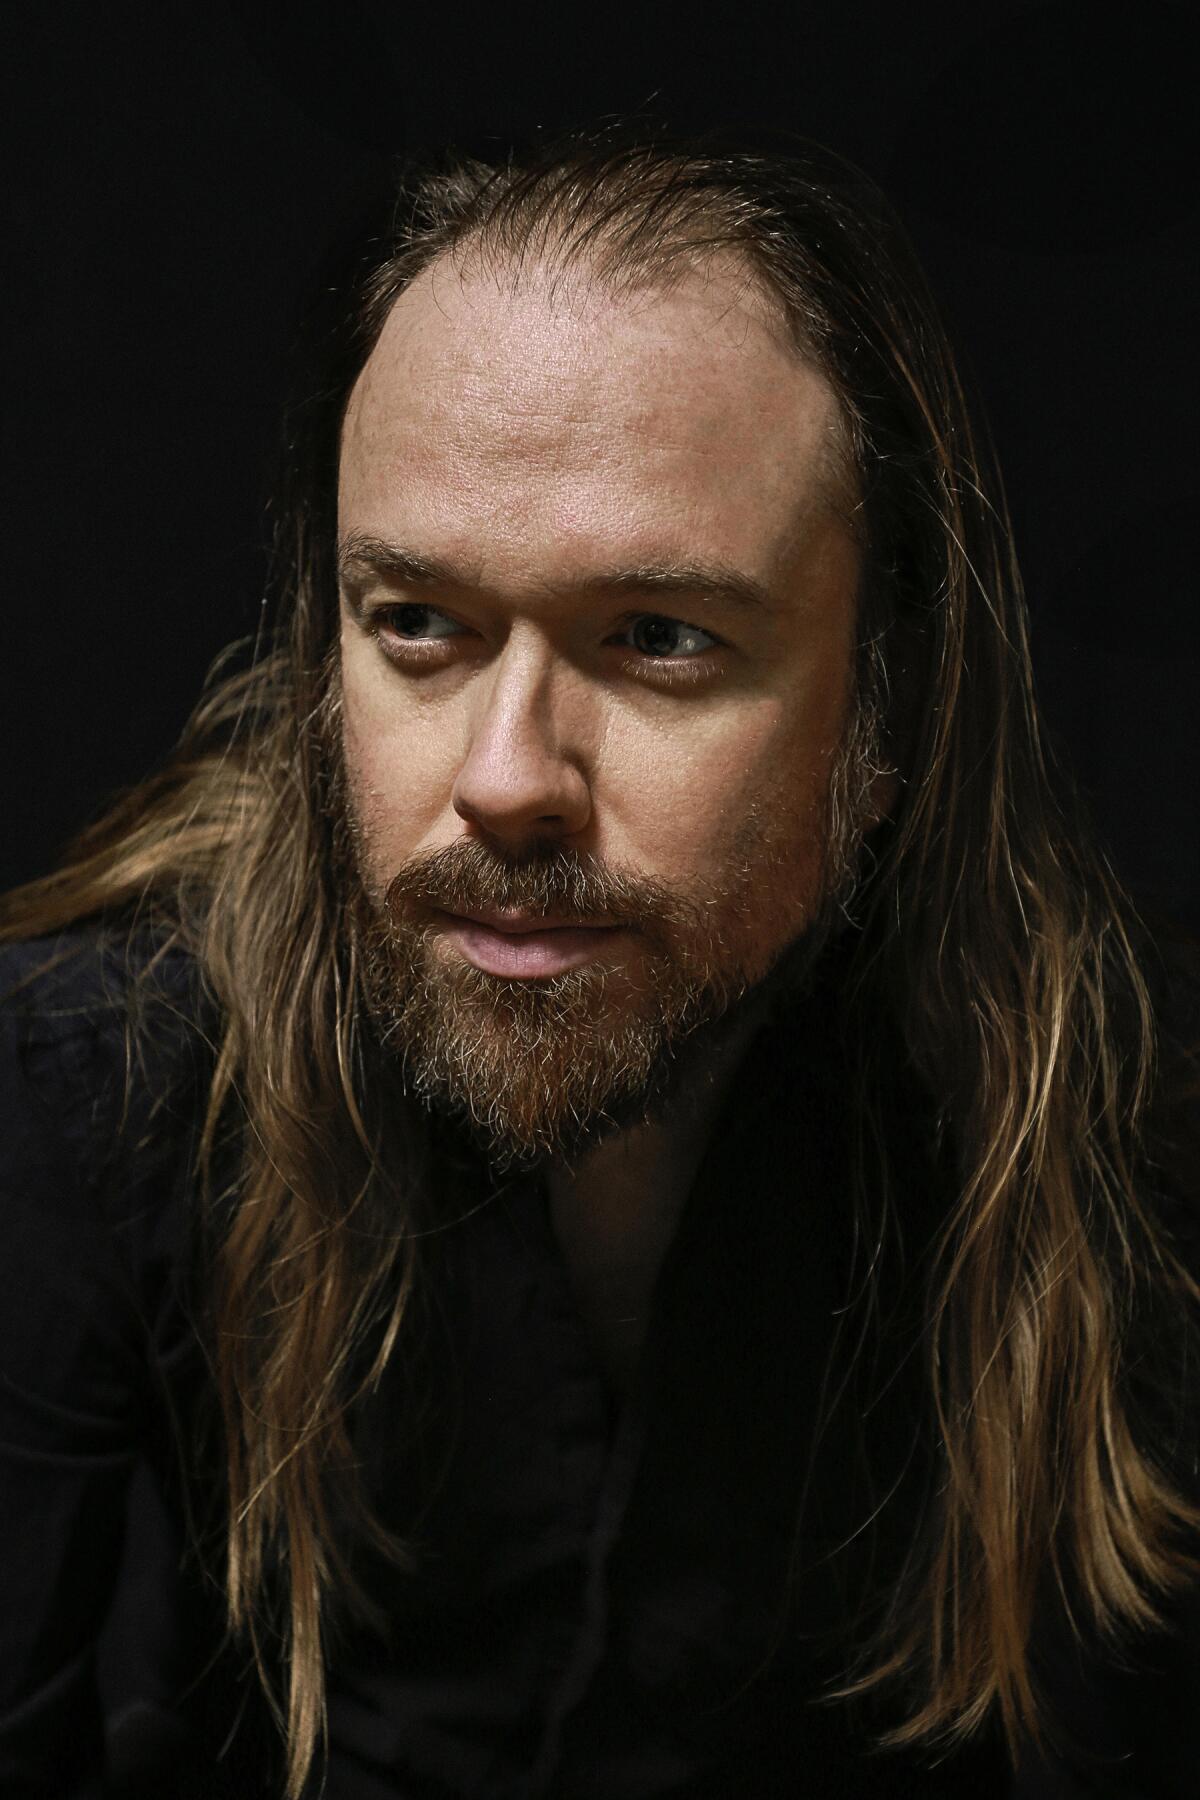 Portrait of long-haired man looking away from camera